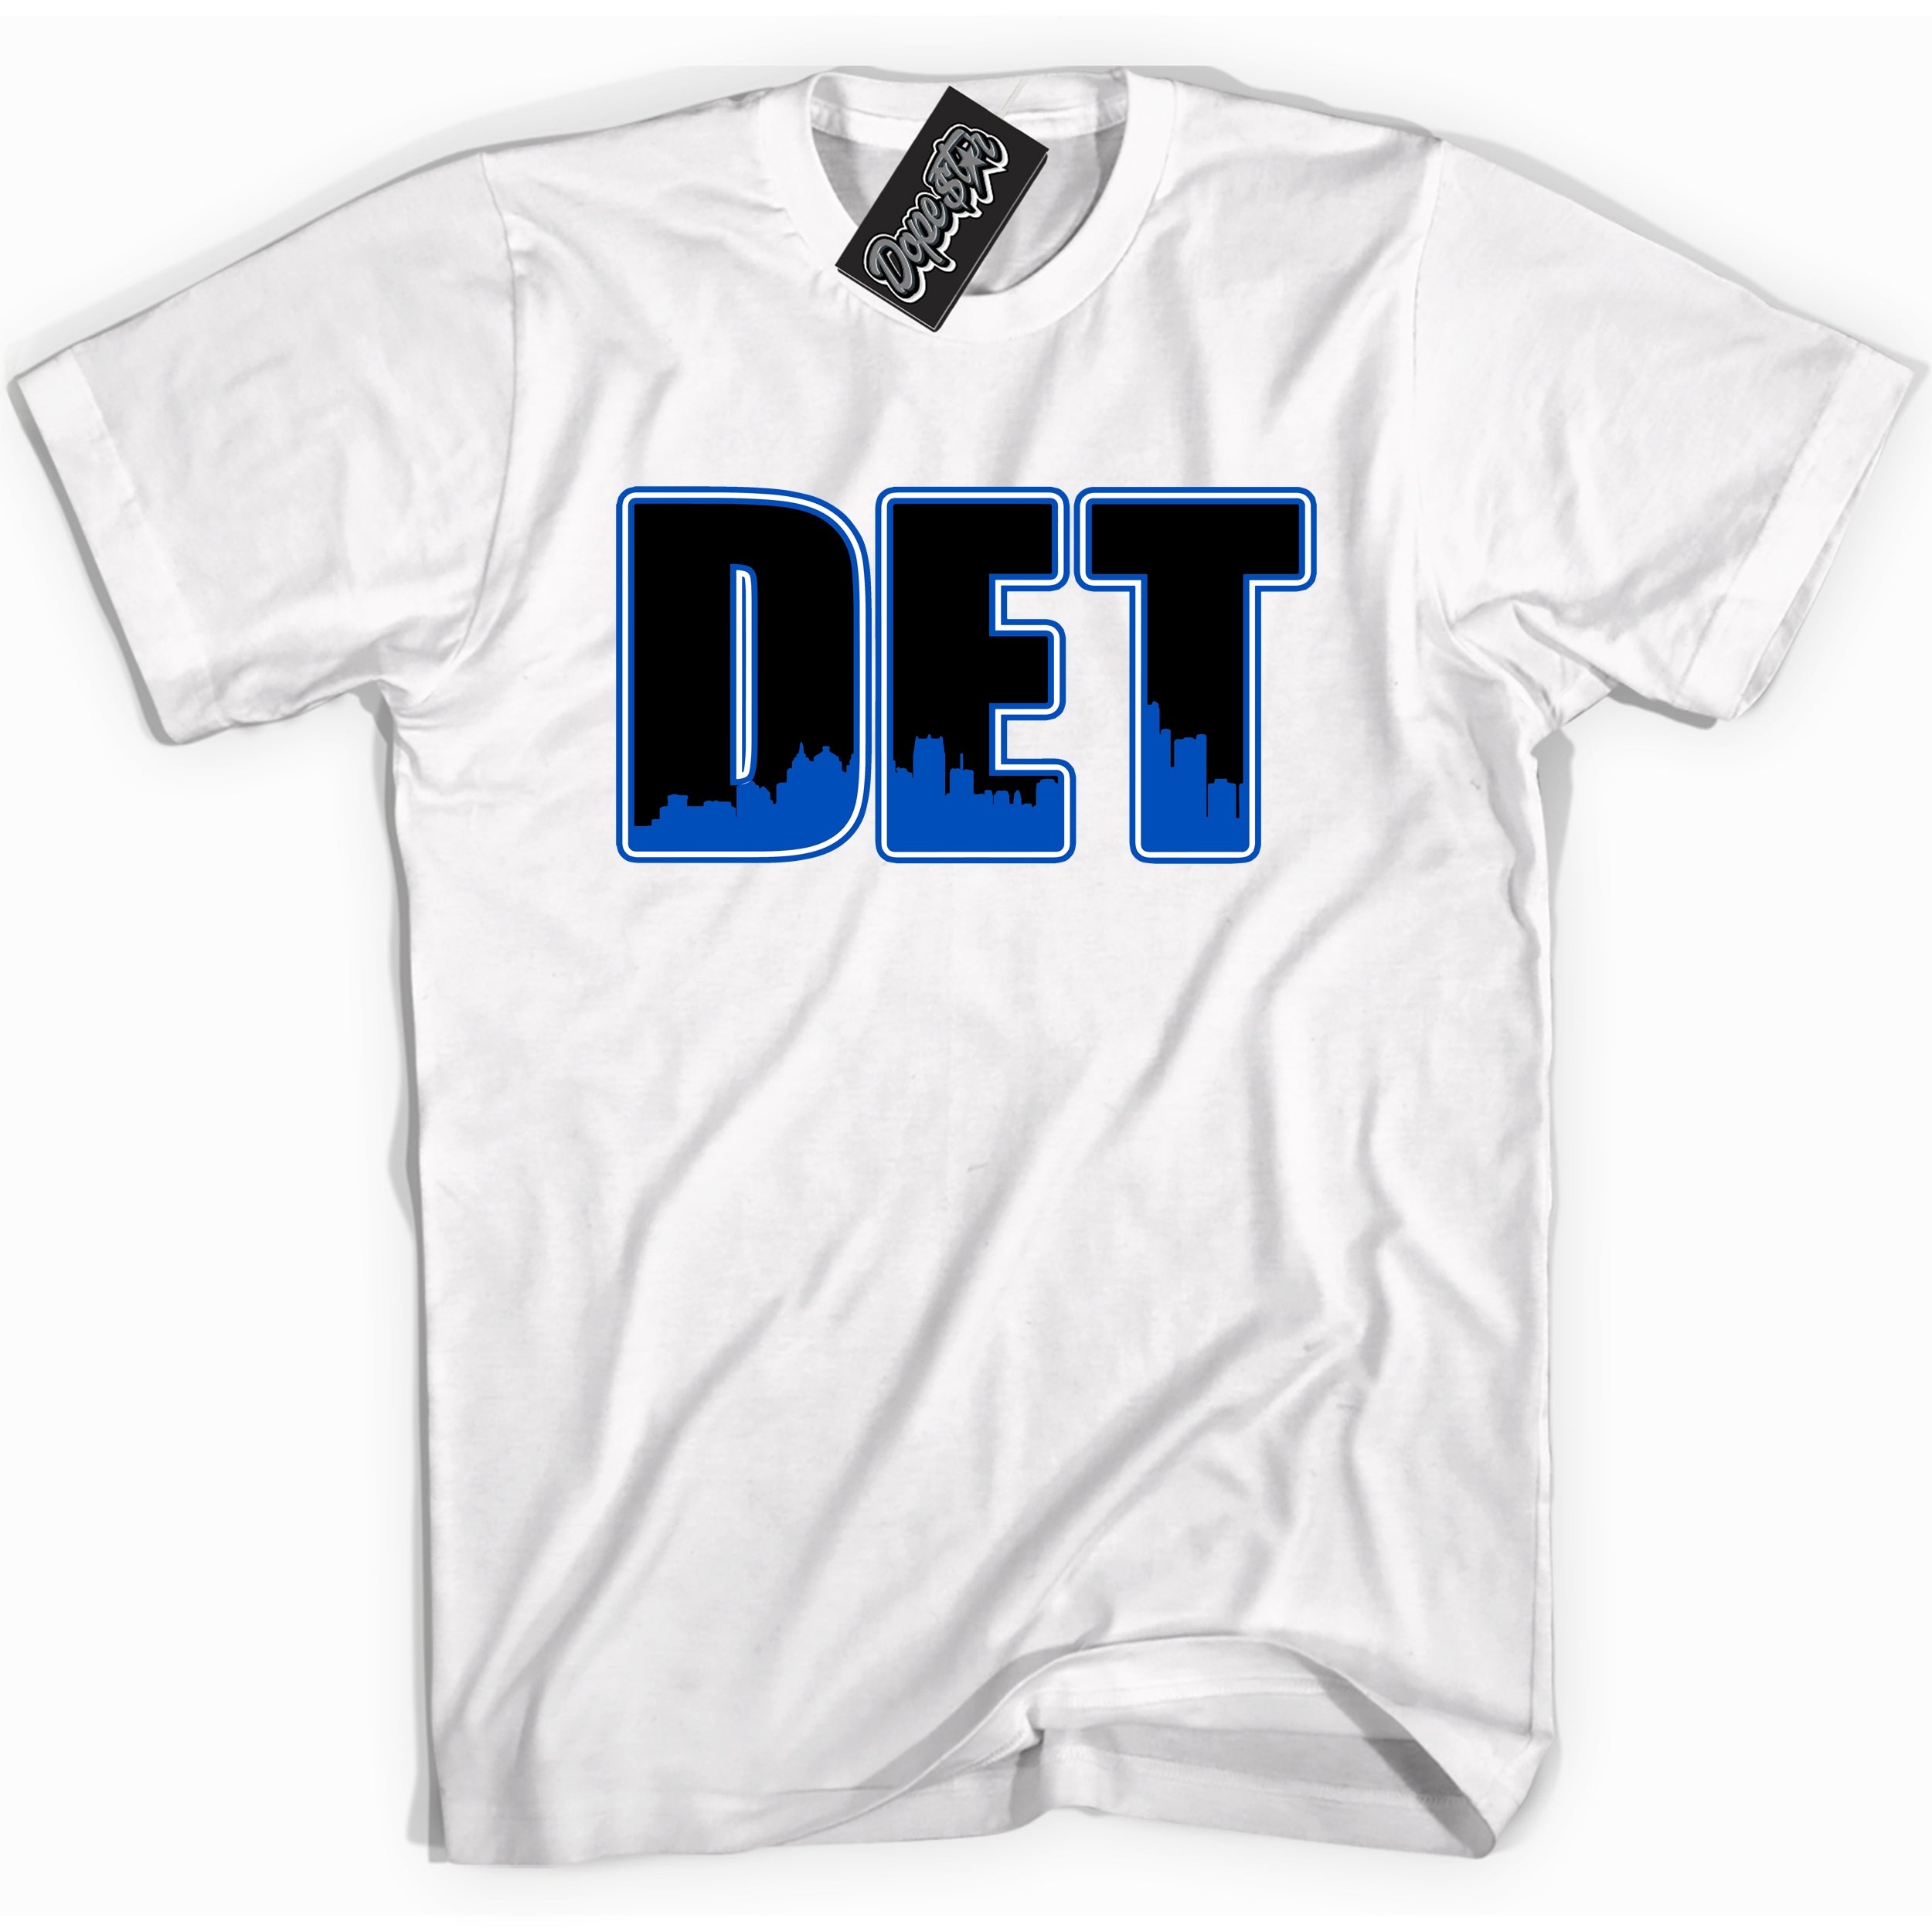 Cool White graphic tee with "Detroit" design, that perfectly matches Royal Reimagined 1s sneakers 